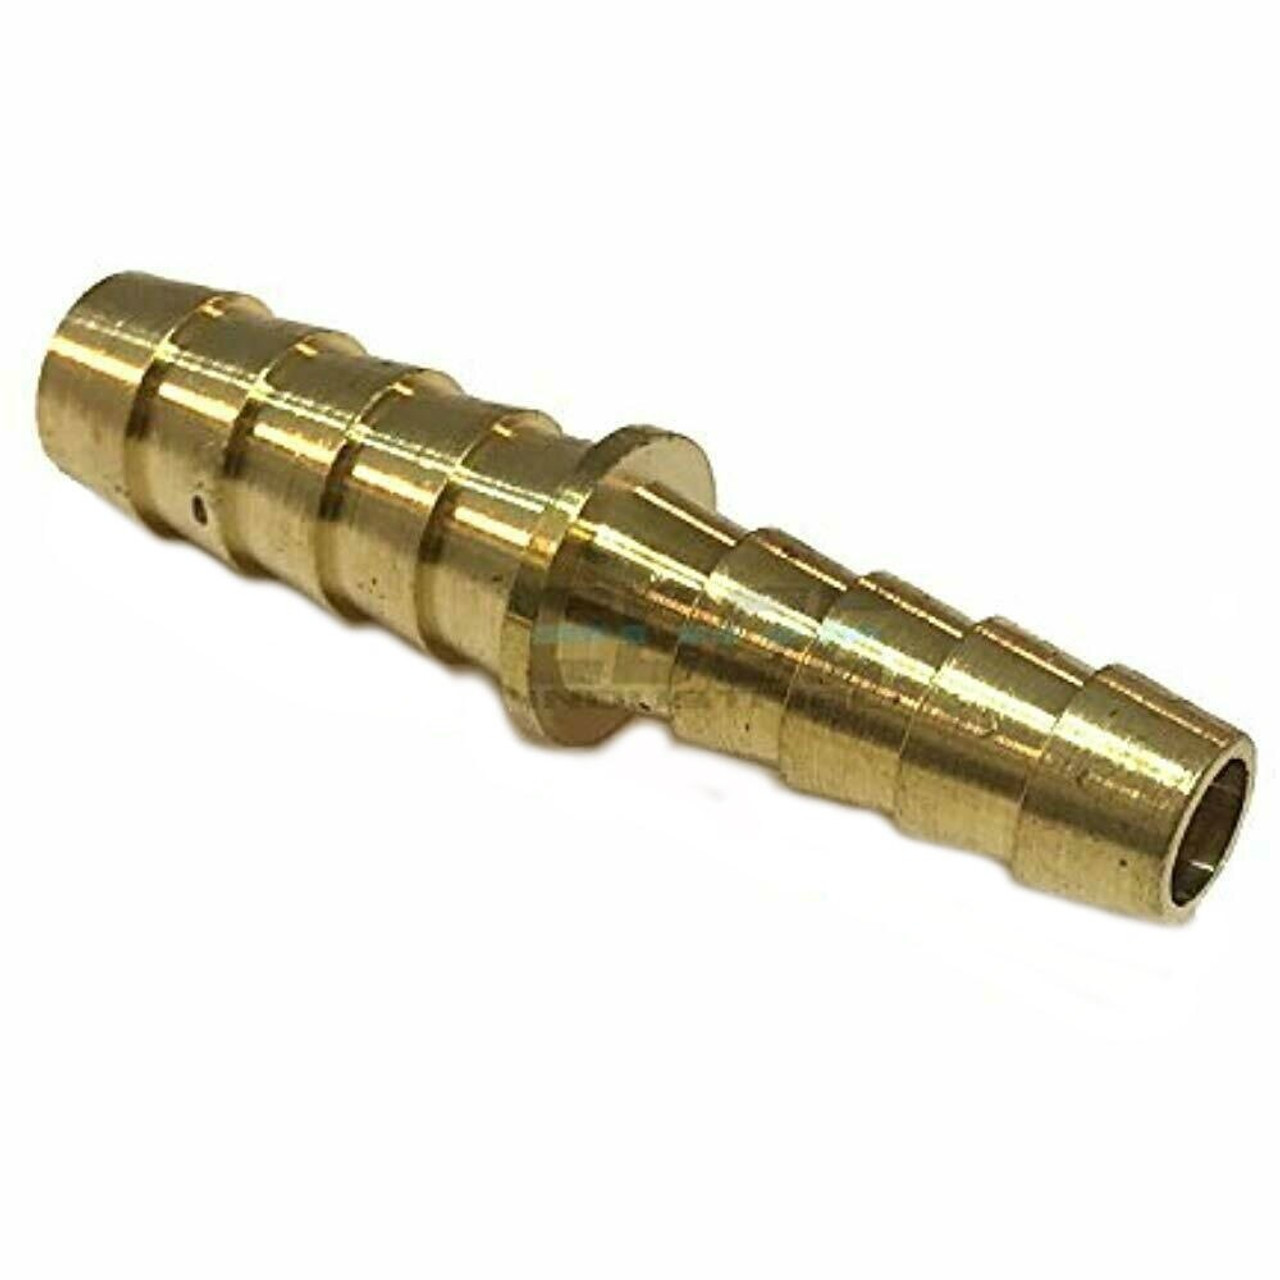 1x Hose Male Connector 1/4" BSP Tailpiece For Petrol Fuel Hose Pipe 5/16" ID 